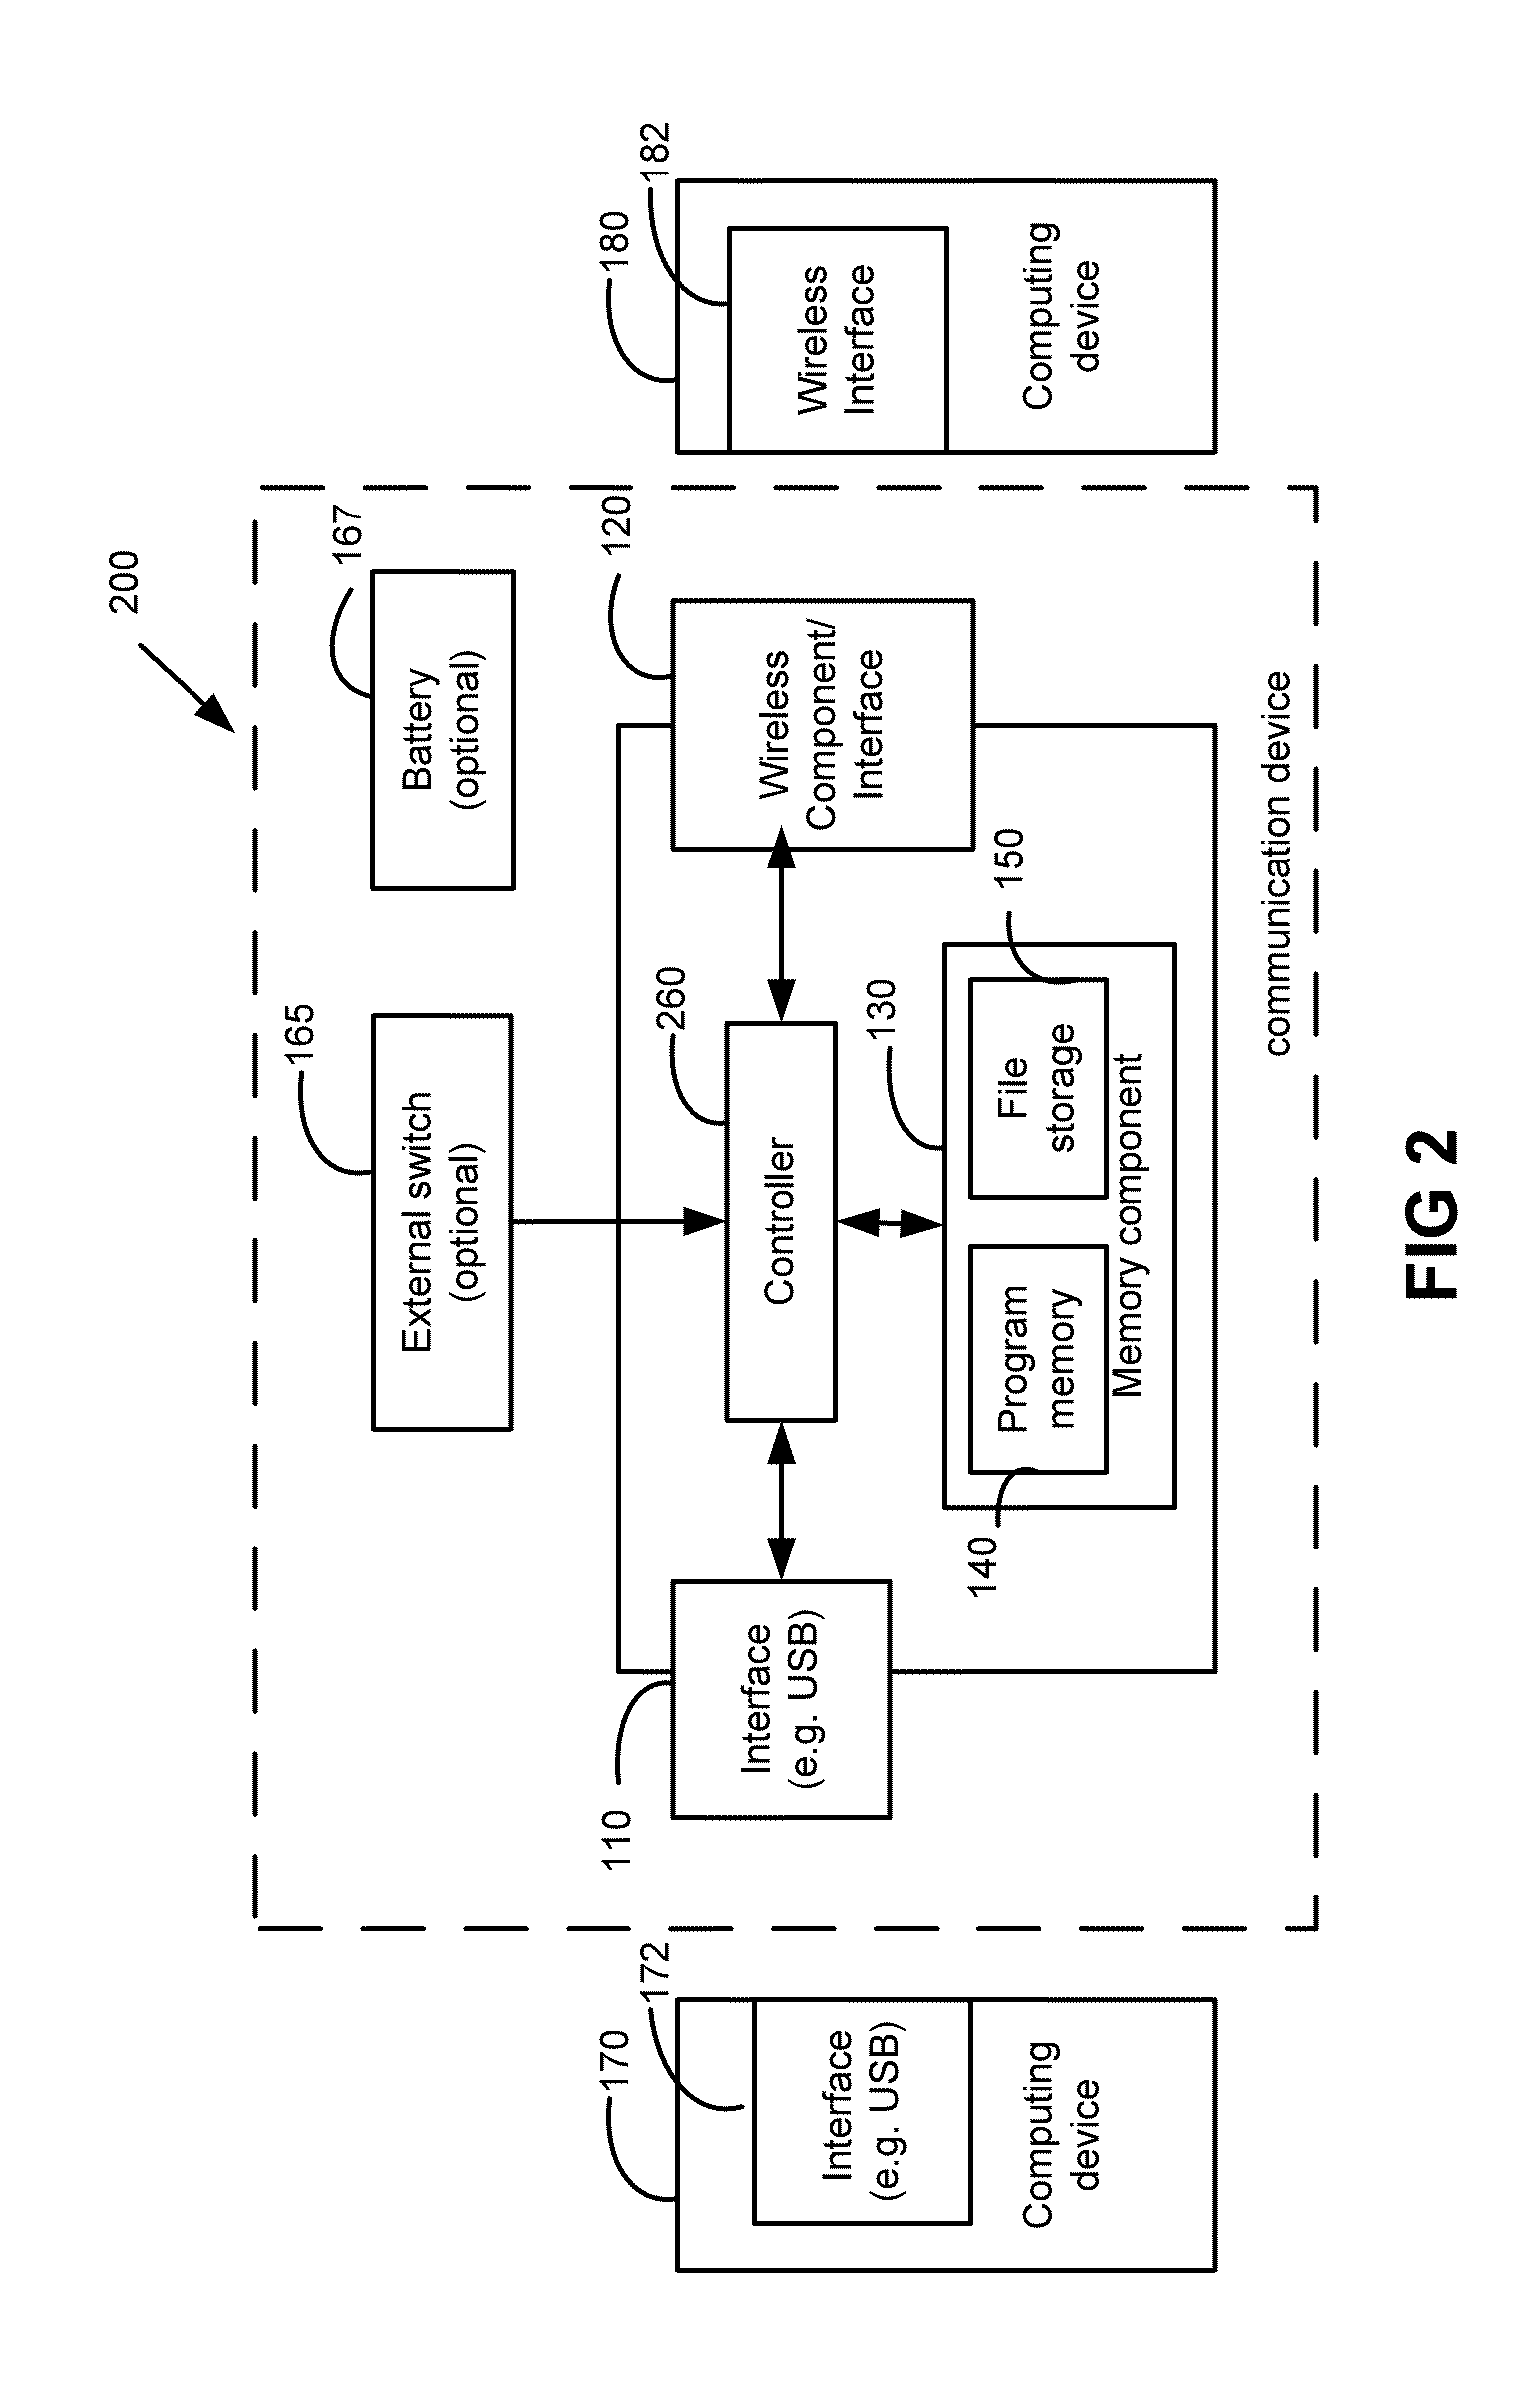 Method for internet access and for communication